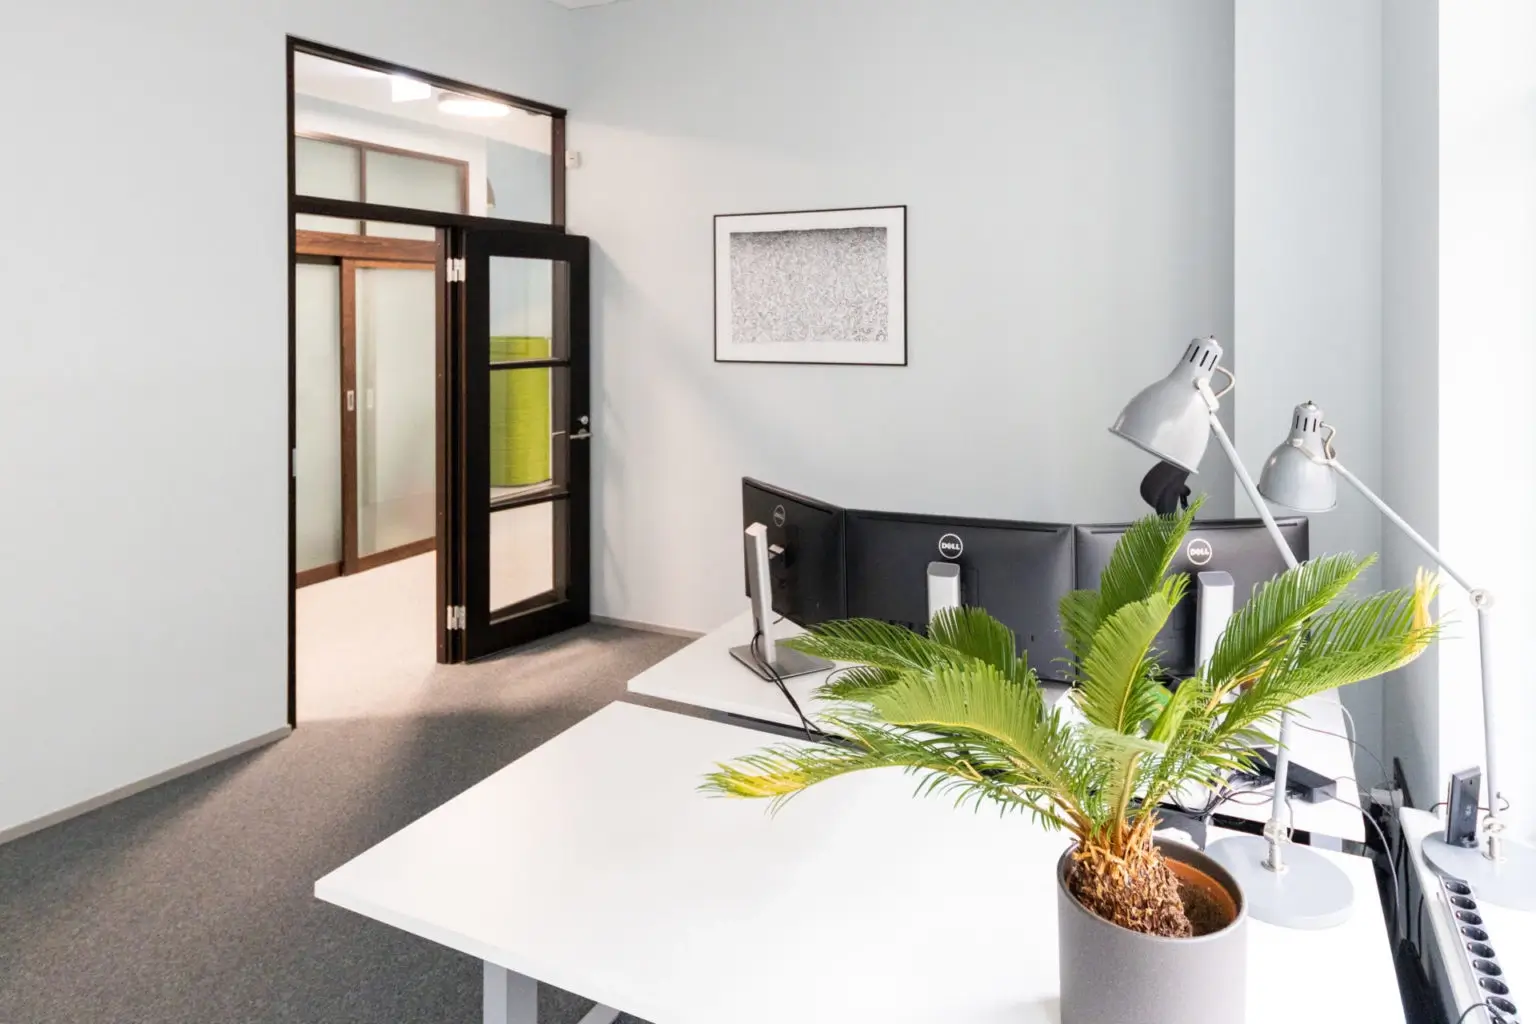 Image of an Erply office with a computer and plant on the table